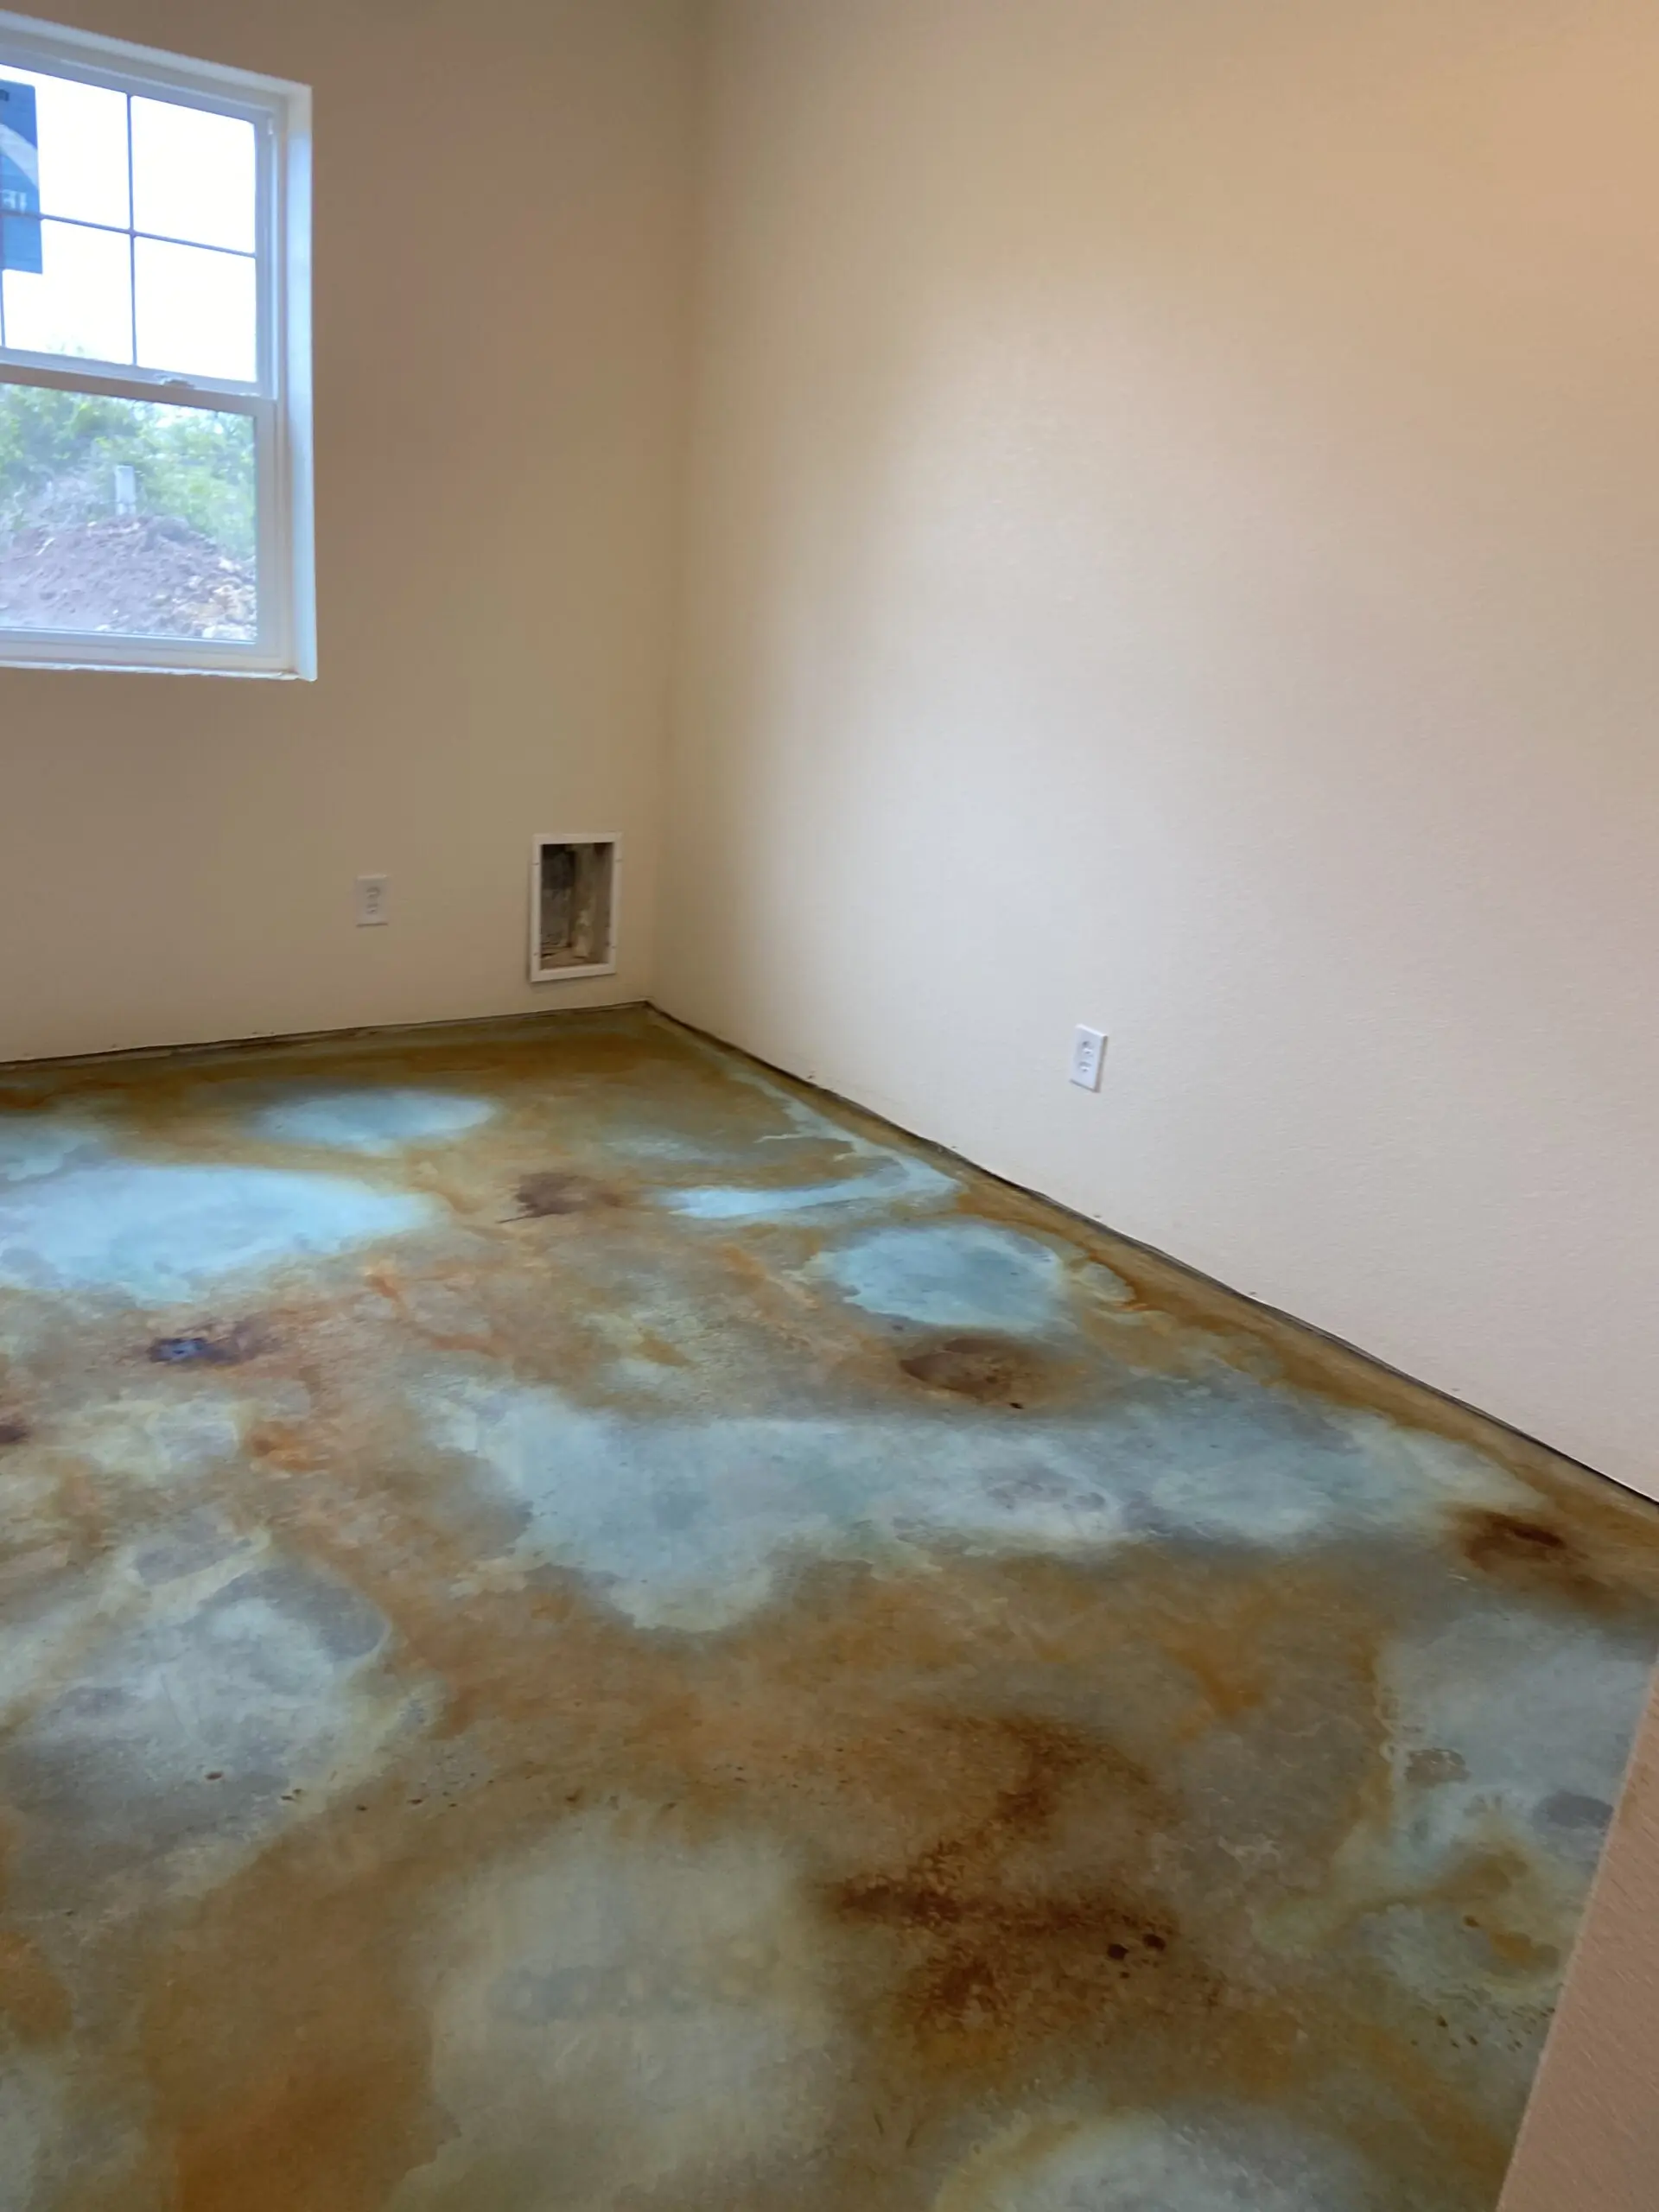 A photograph showing the stained concrete floor after the acid stains have reacted, have been neutralized, and cleaned